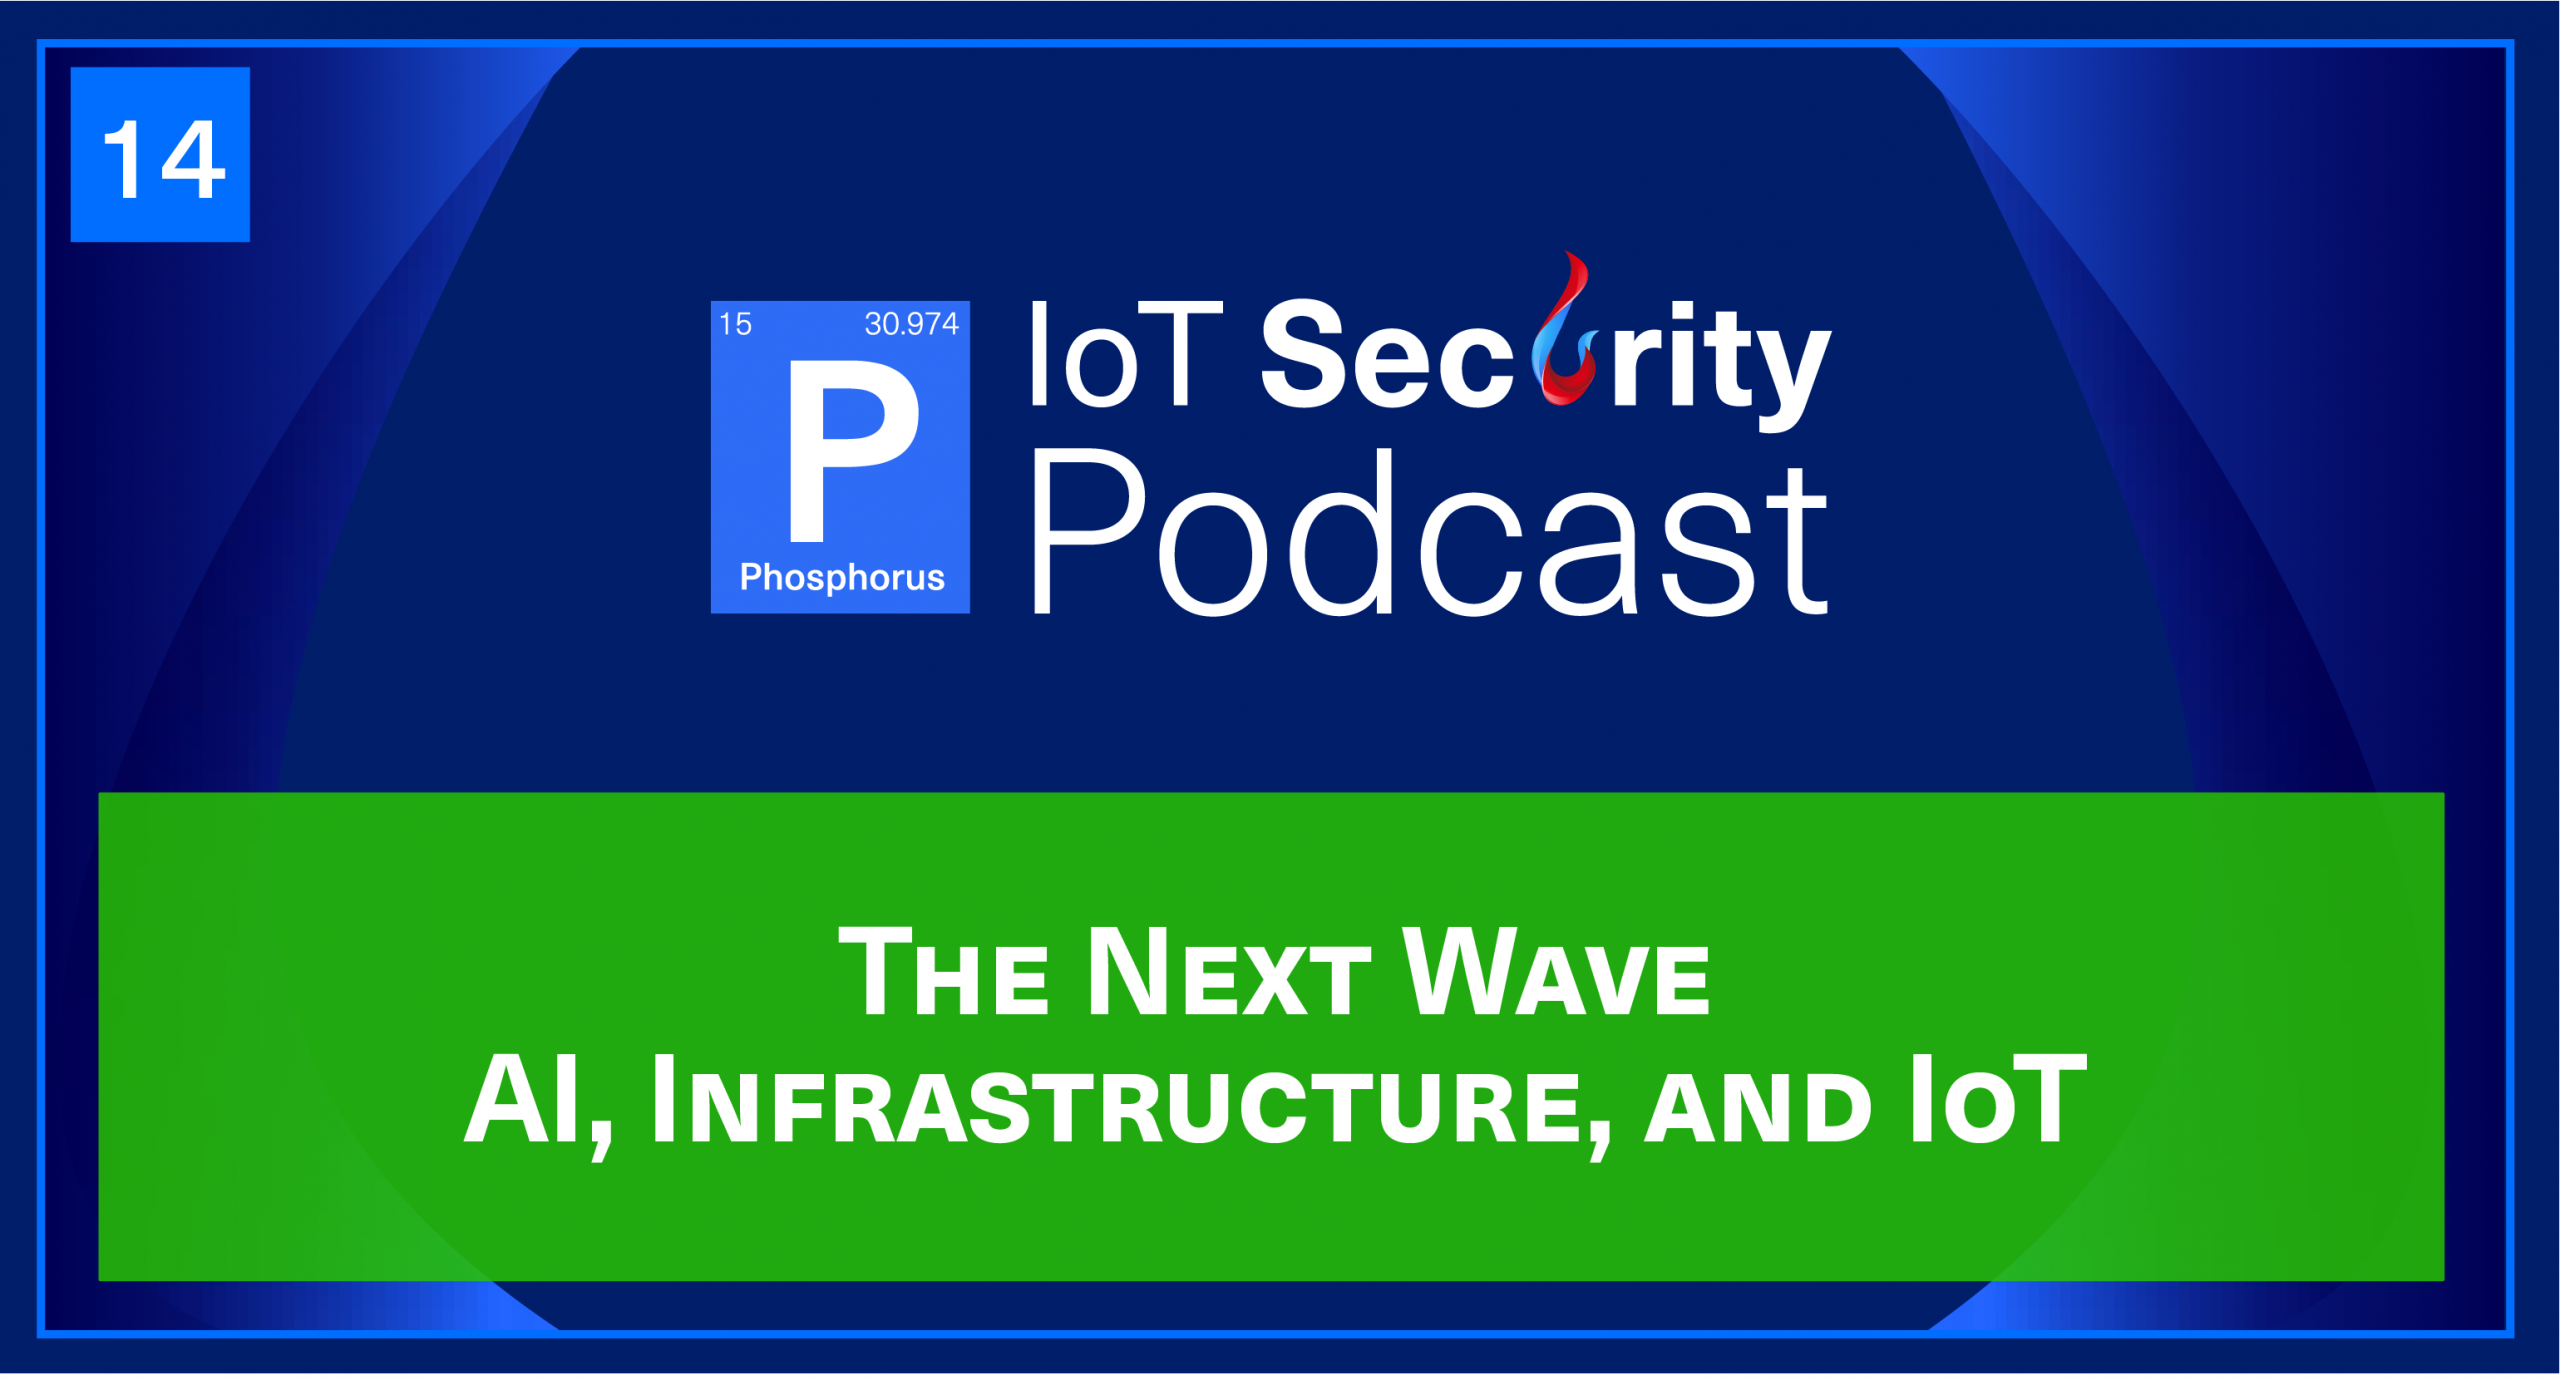 The Next Wave: AI, Infrastructure, and IoT with Mark Weatherford